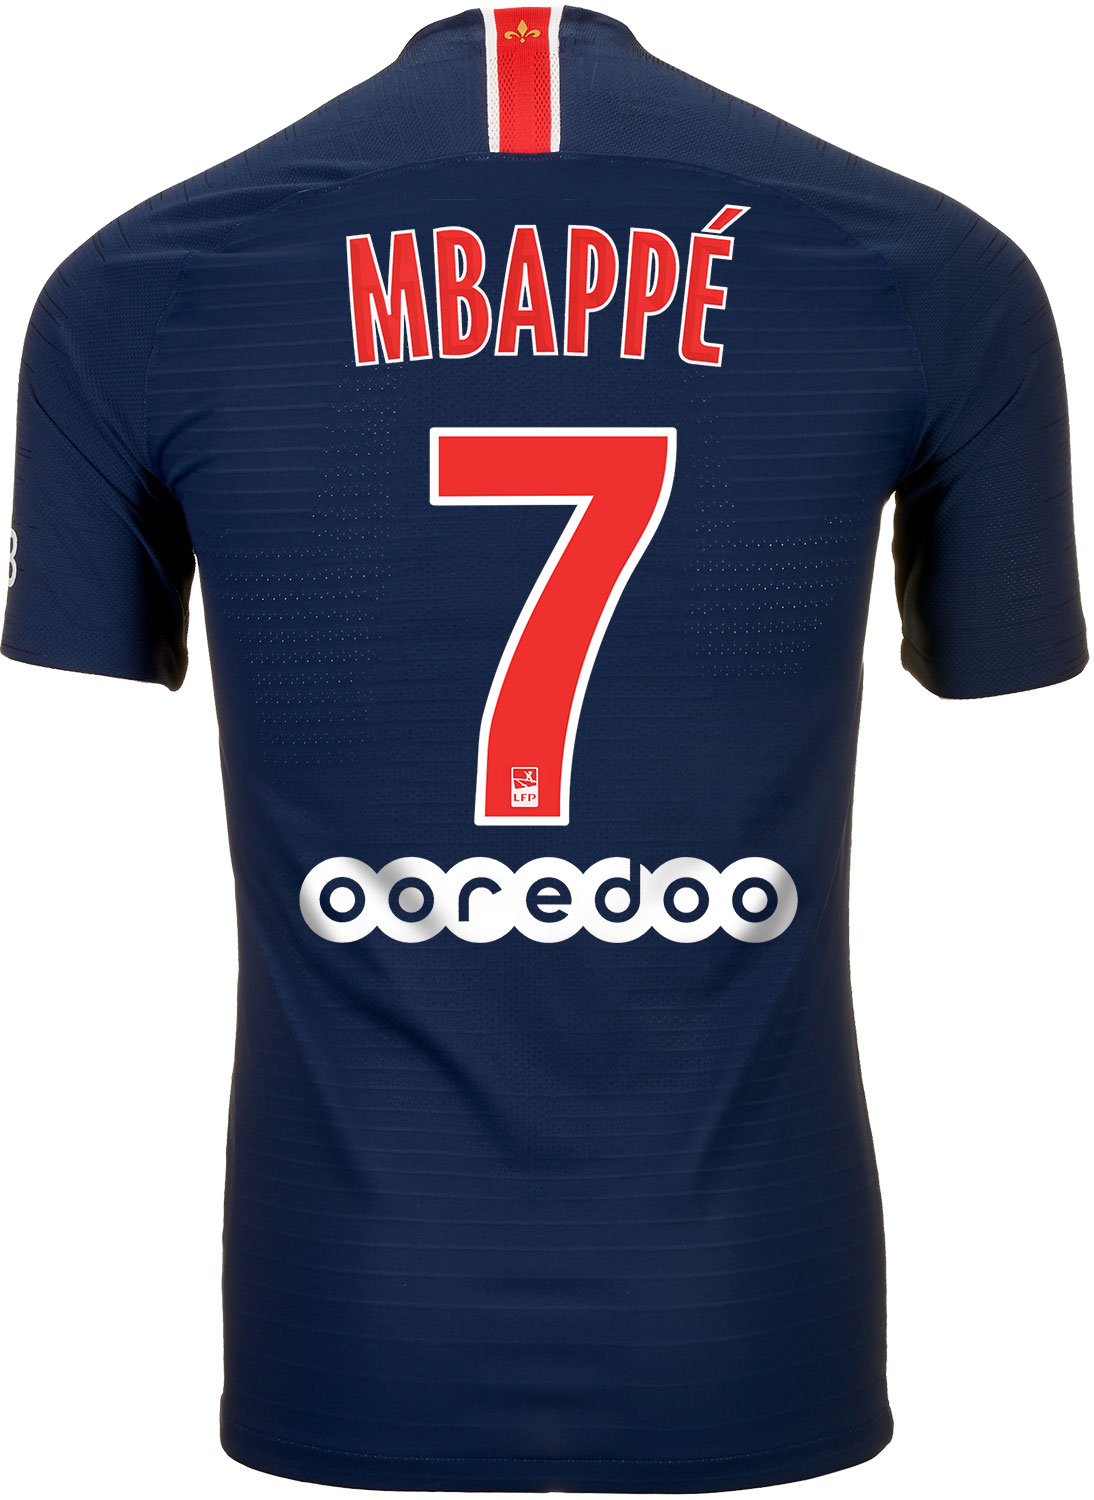 mbappe psg youth jersey